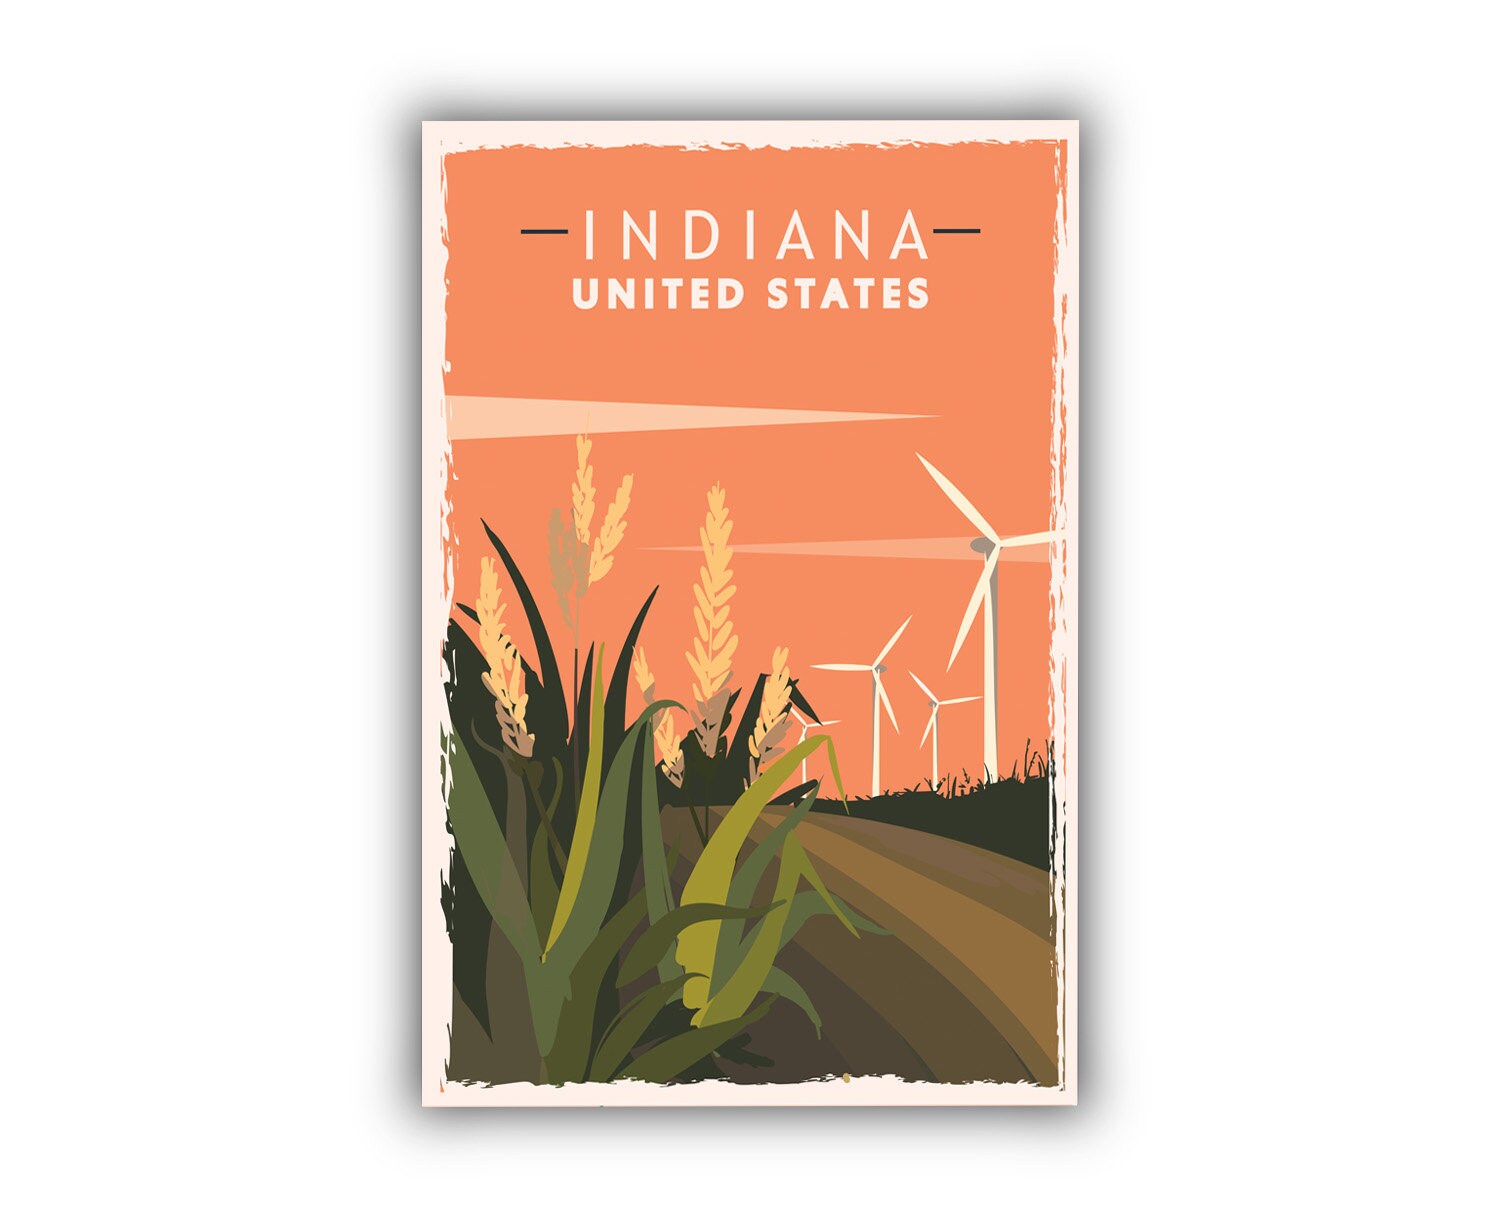 Retro Style Travel Poster, Indiana Vintage Rustic Poster Print, Home Wall Art, Office Wall Decor, Poster Prints, Indiana, State Map Poster